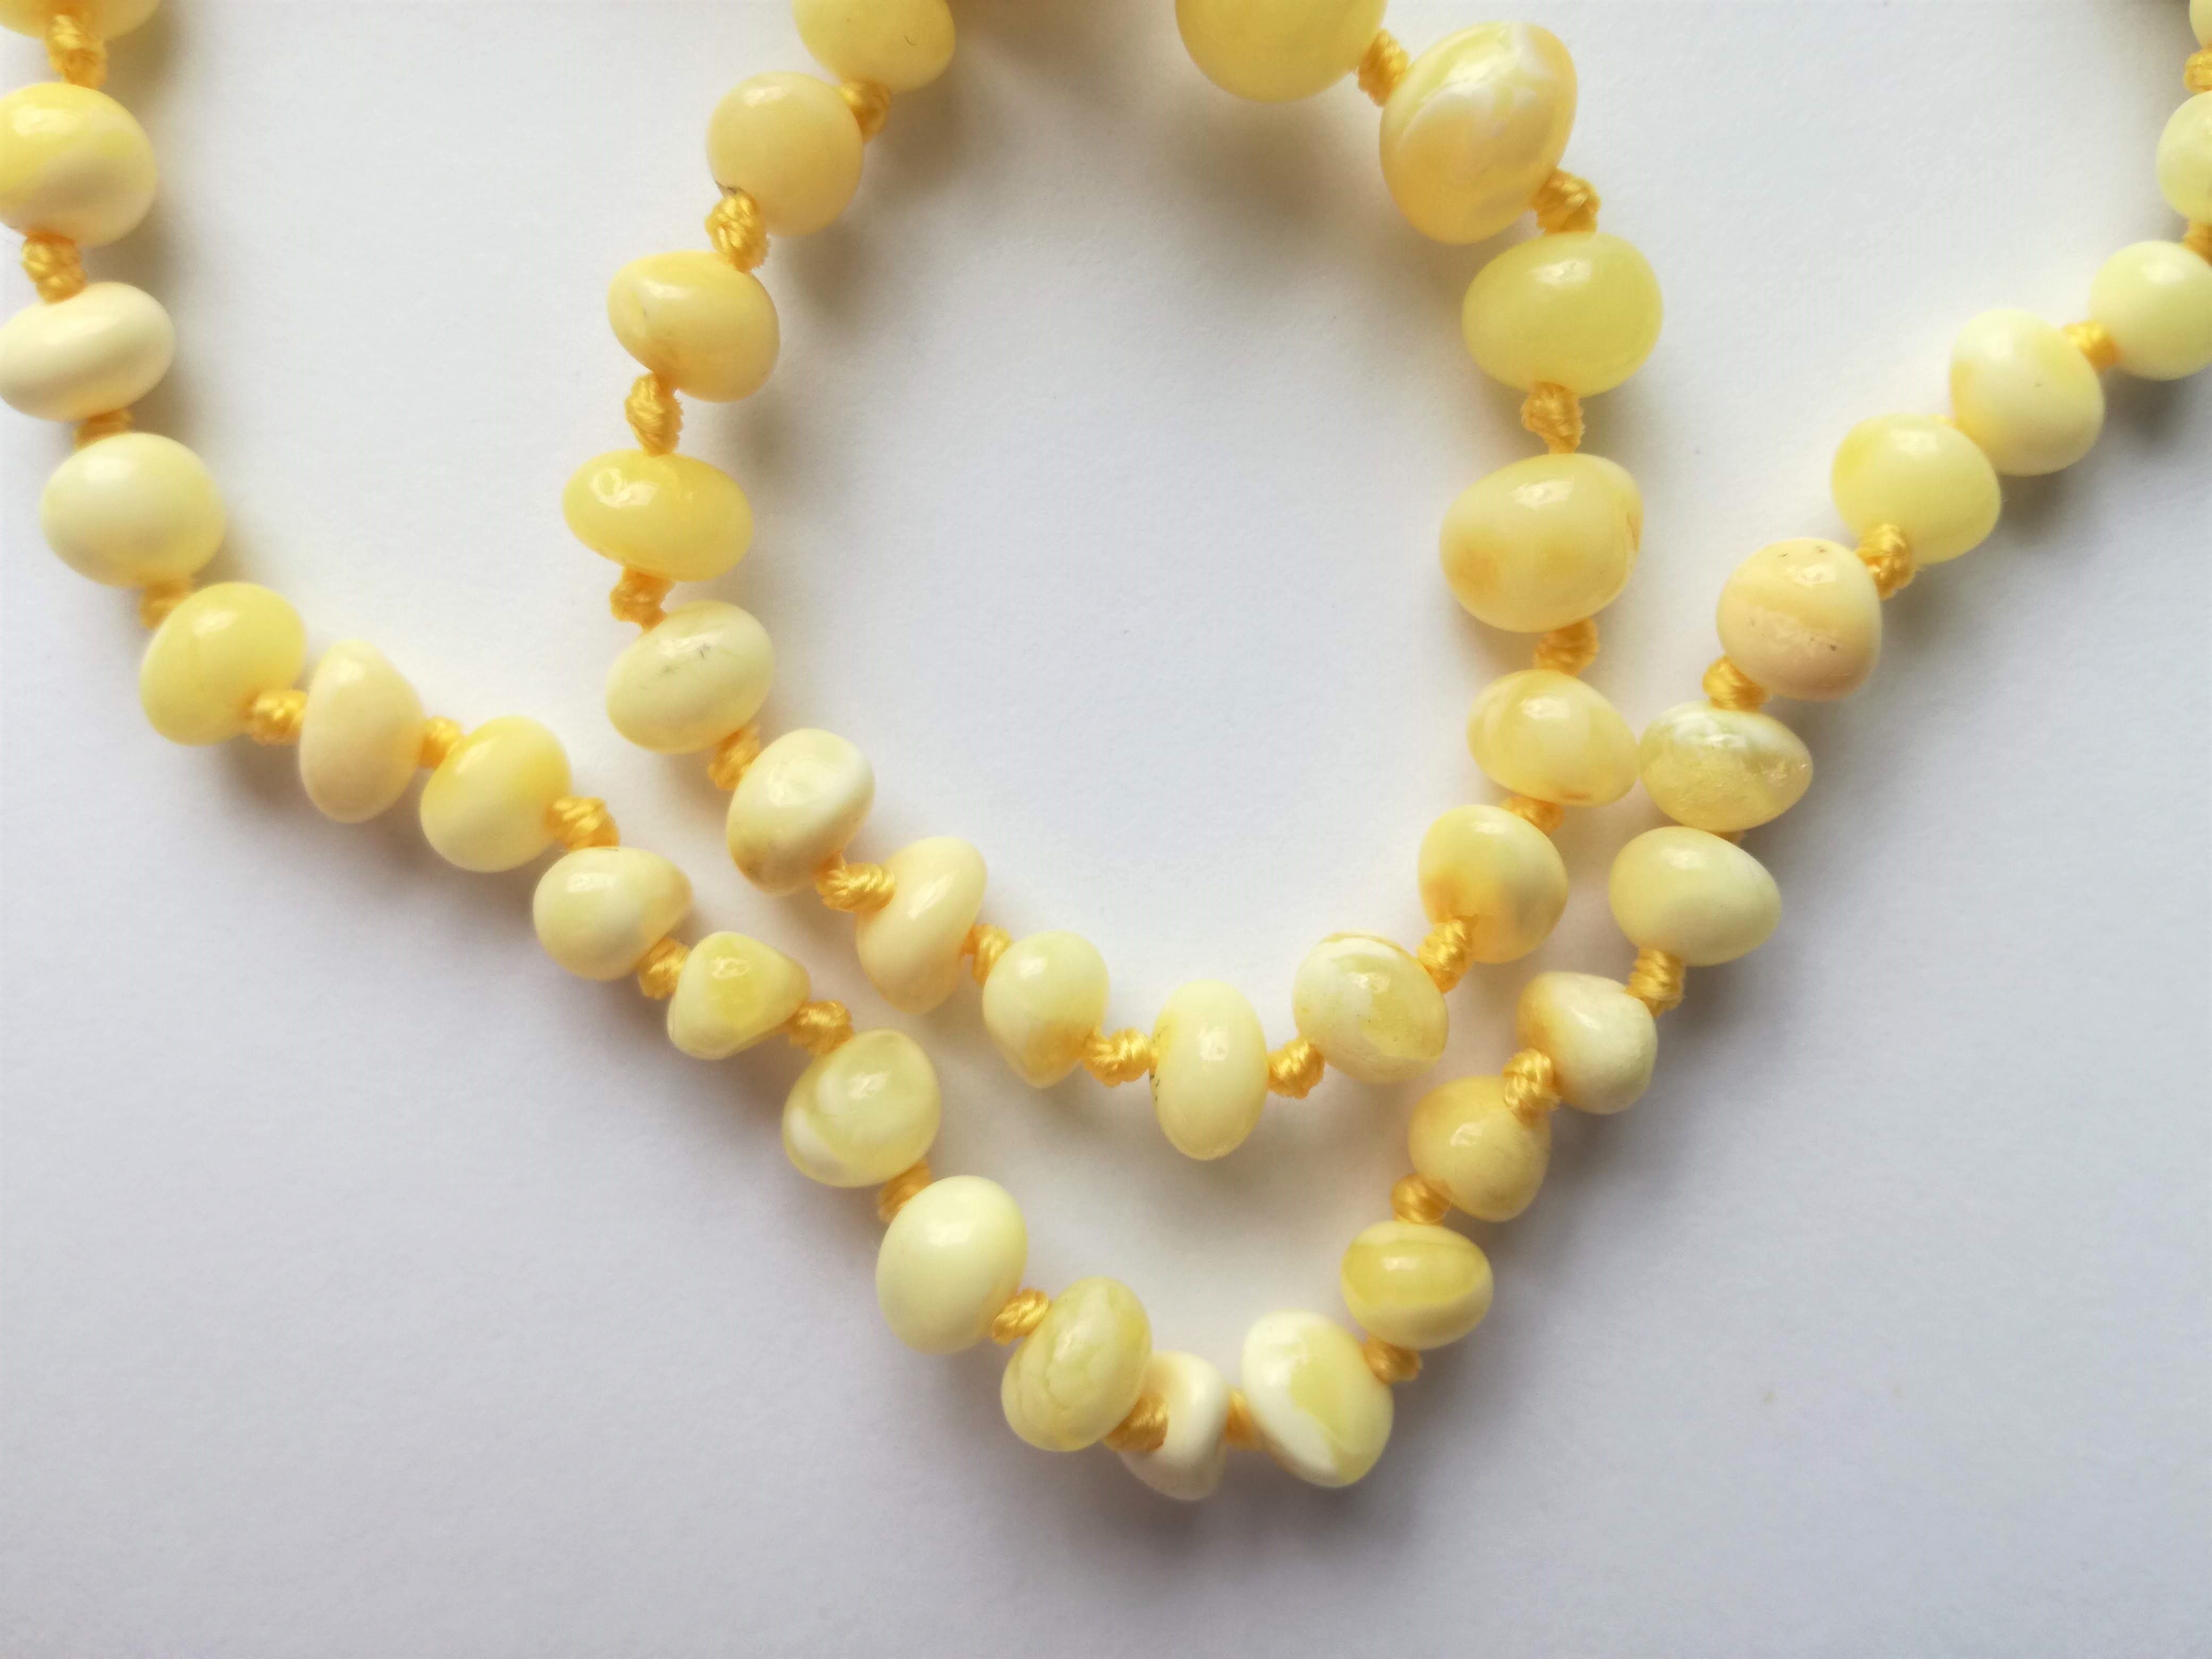 amber teething necklace, white and milky polished beads, premium product, limited edition, plastic screw clasp, healing, succinic acid, genuine baltic amber, safe for babies and nursing mums, made in poland, zoom